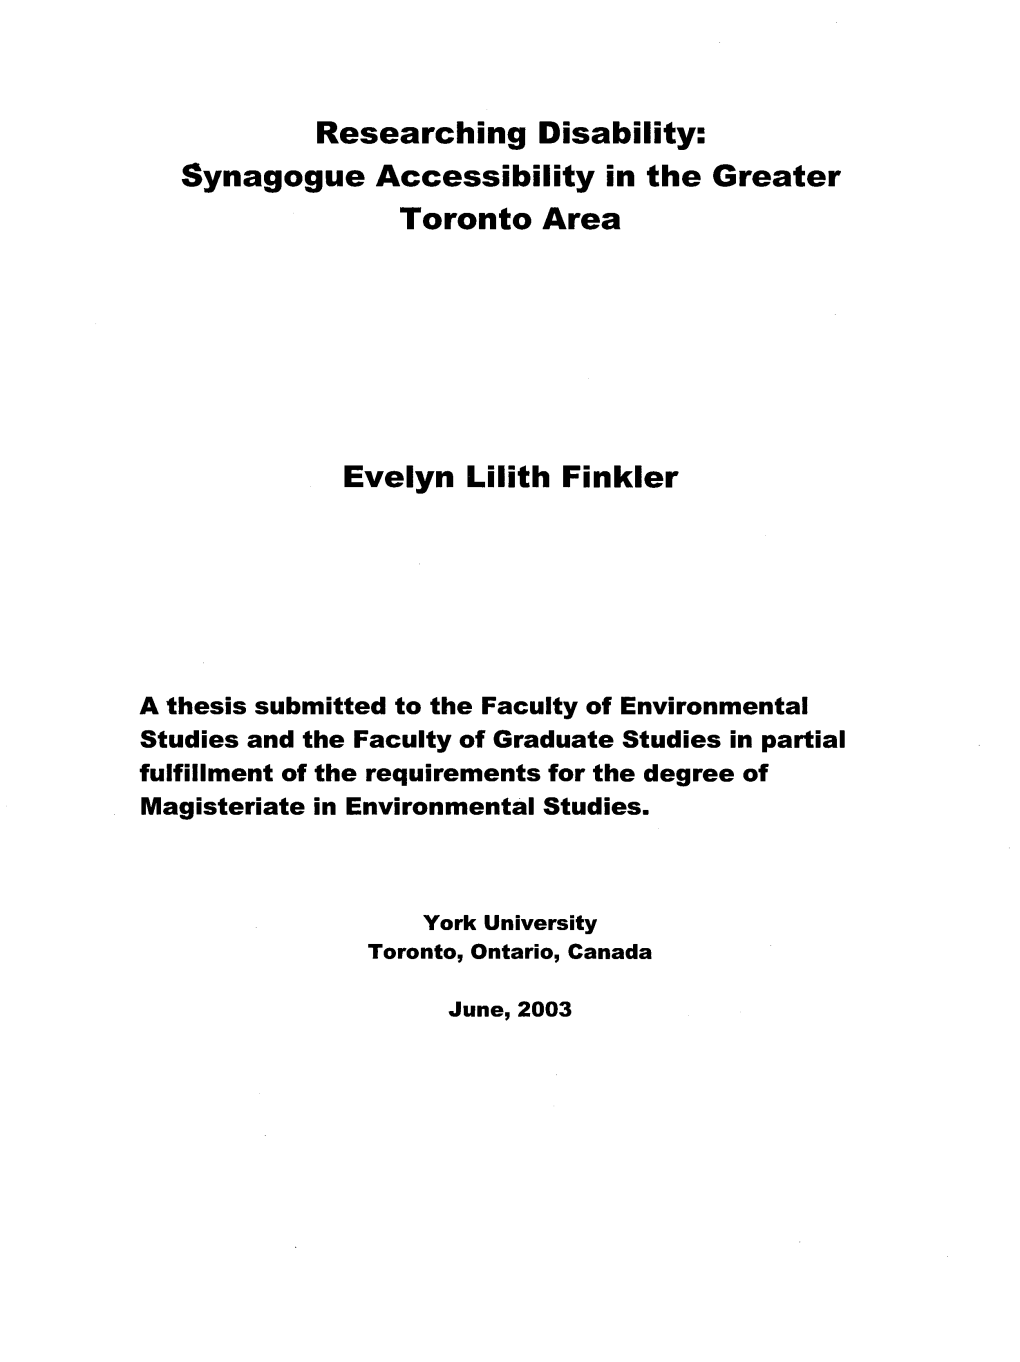 Synagogue Accessibility in the Greater Toronto Area Evelyn Lilith